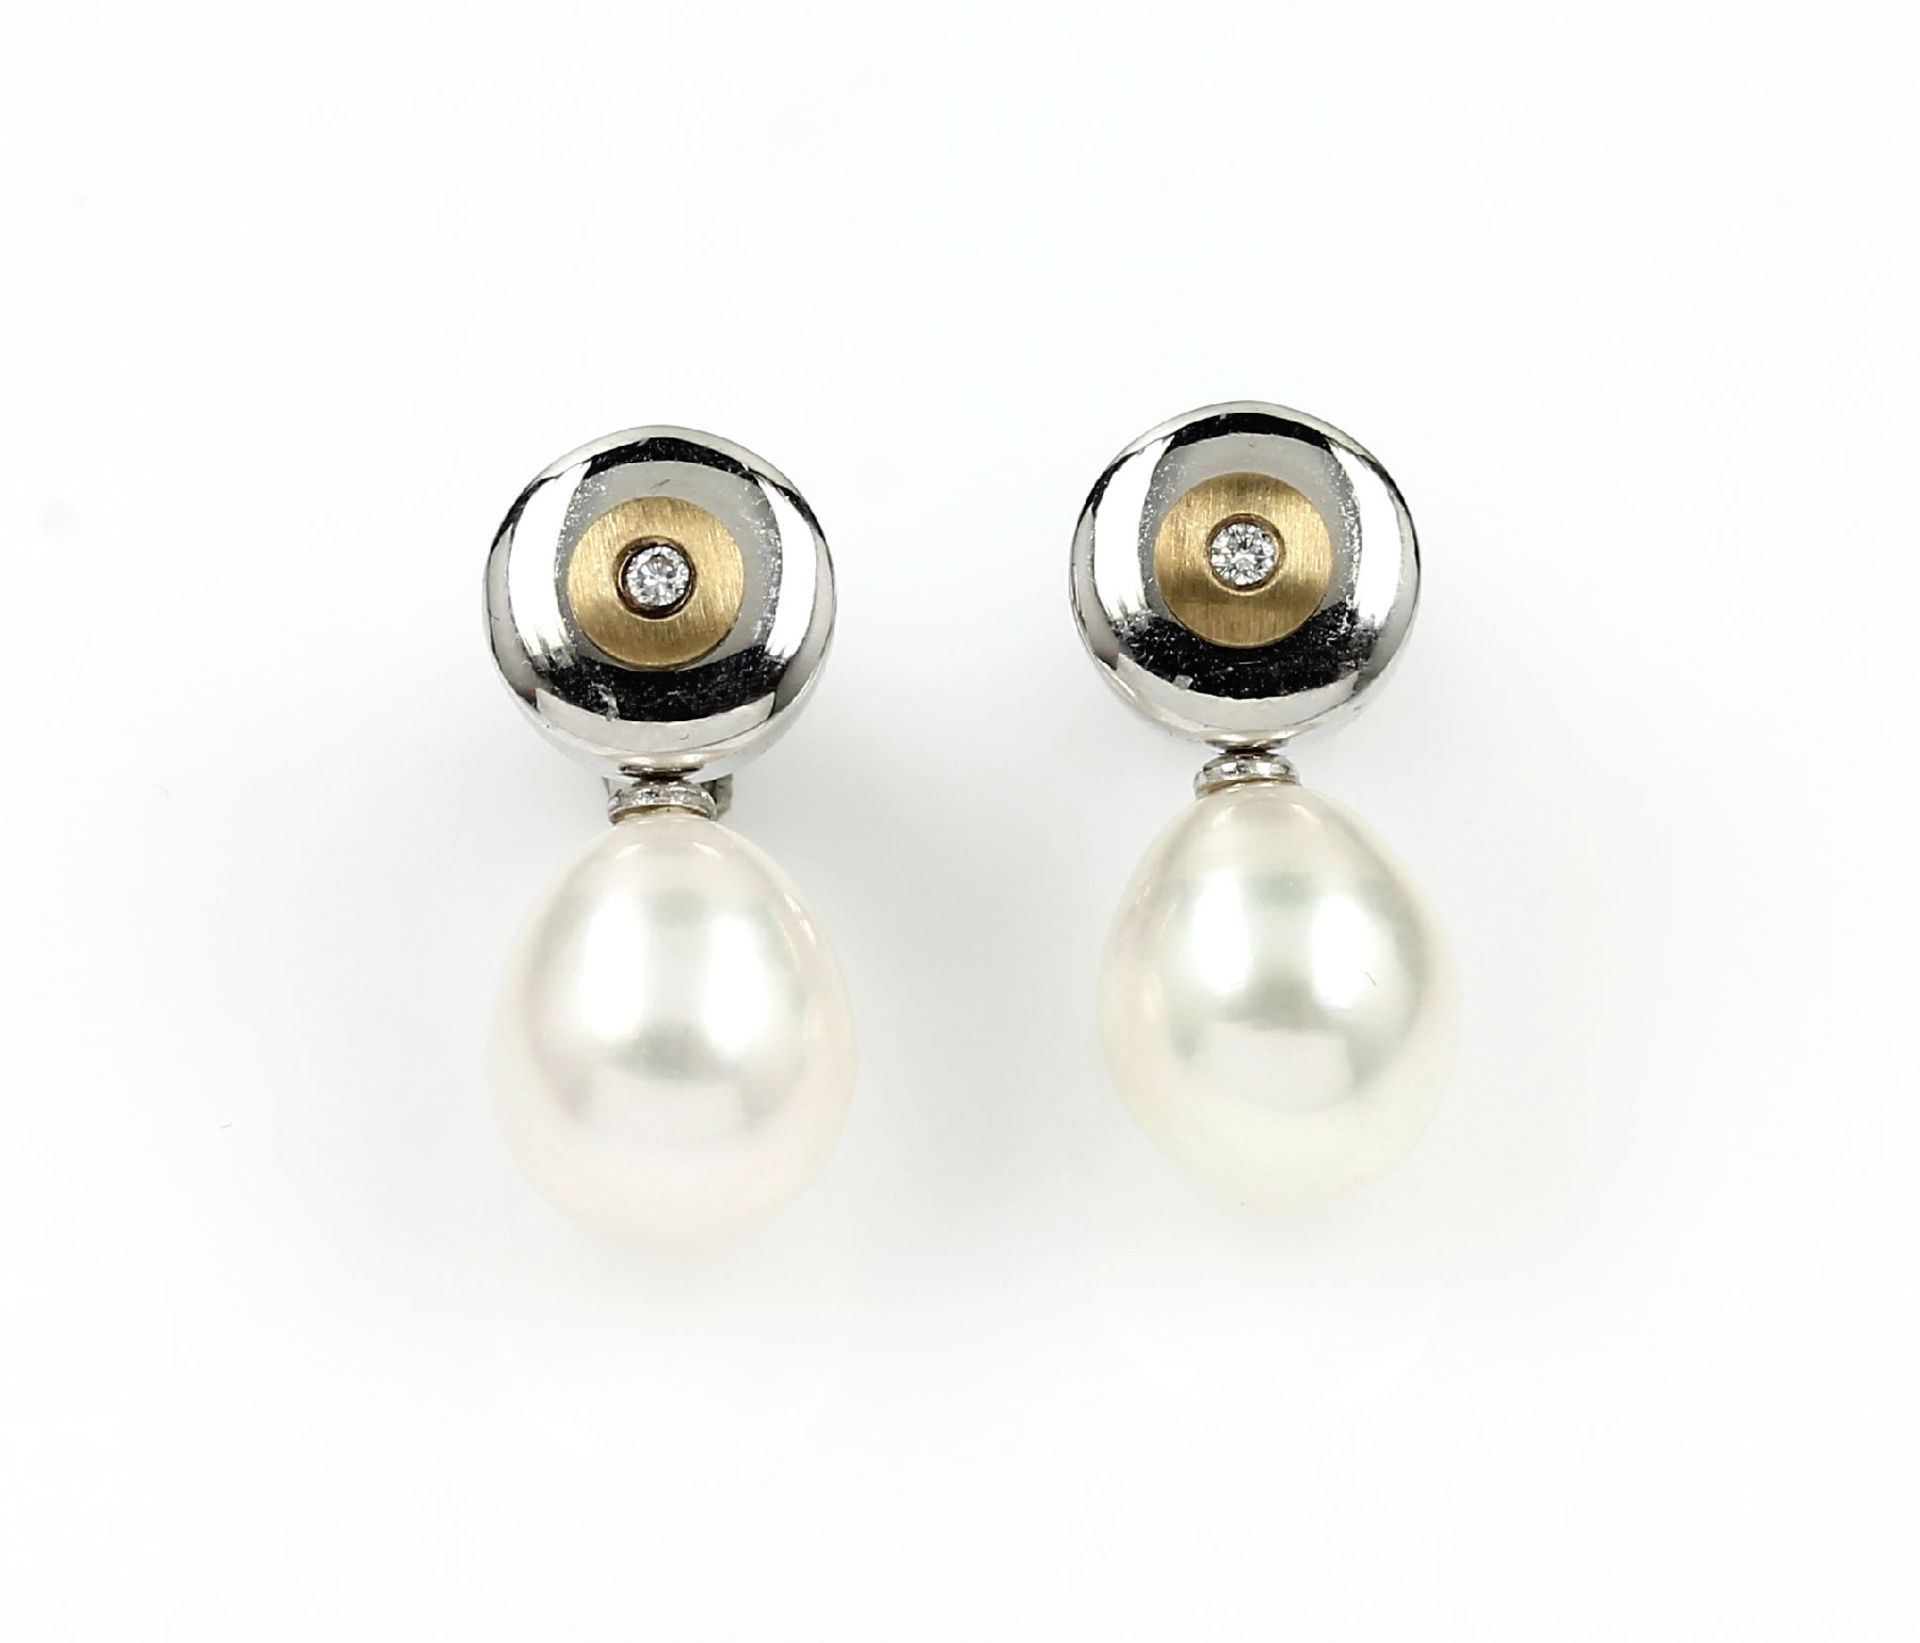 Pair of 14 kt gold earrings with brilliants and cultured fresh water pearls , YG/WG 585/000,